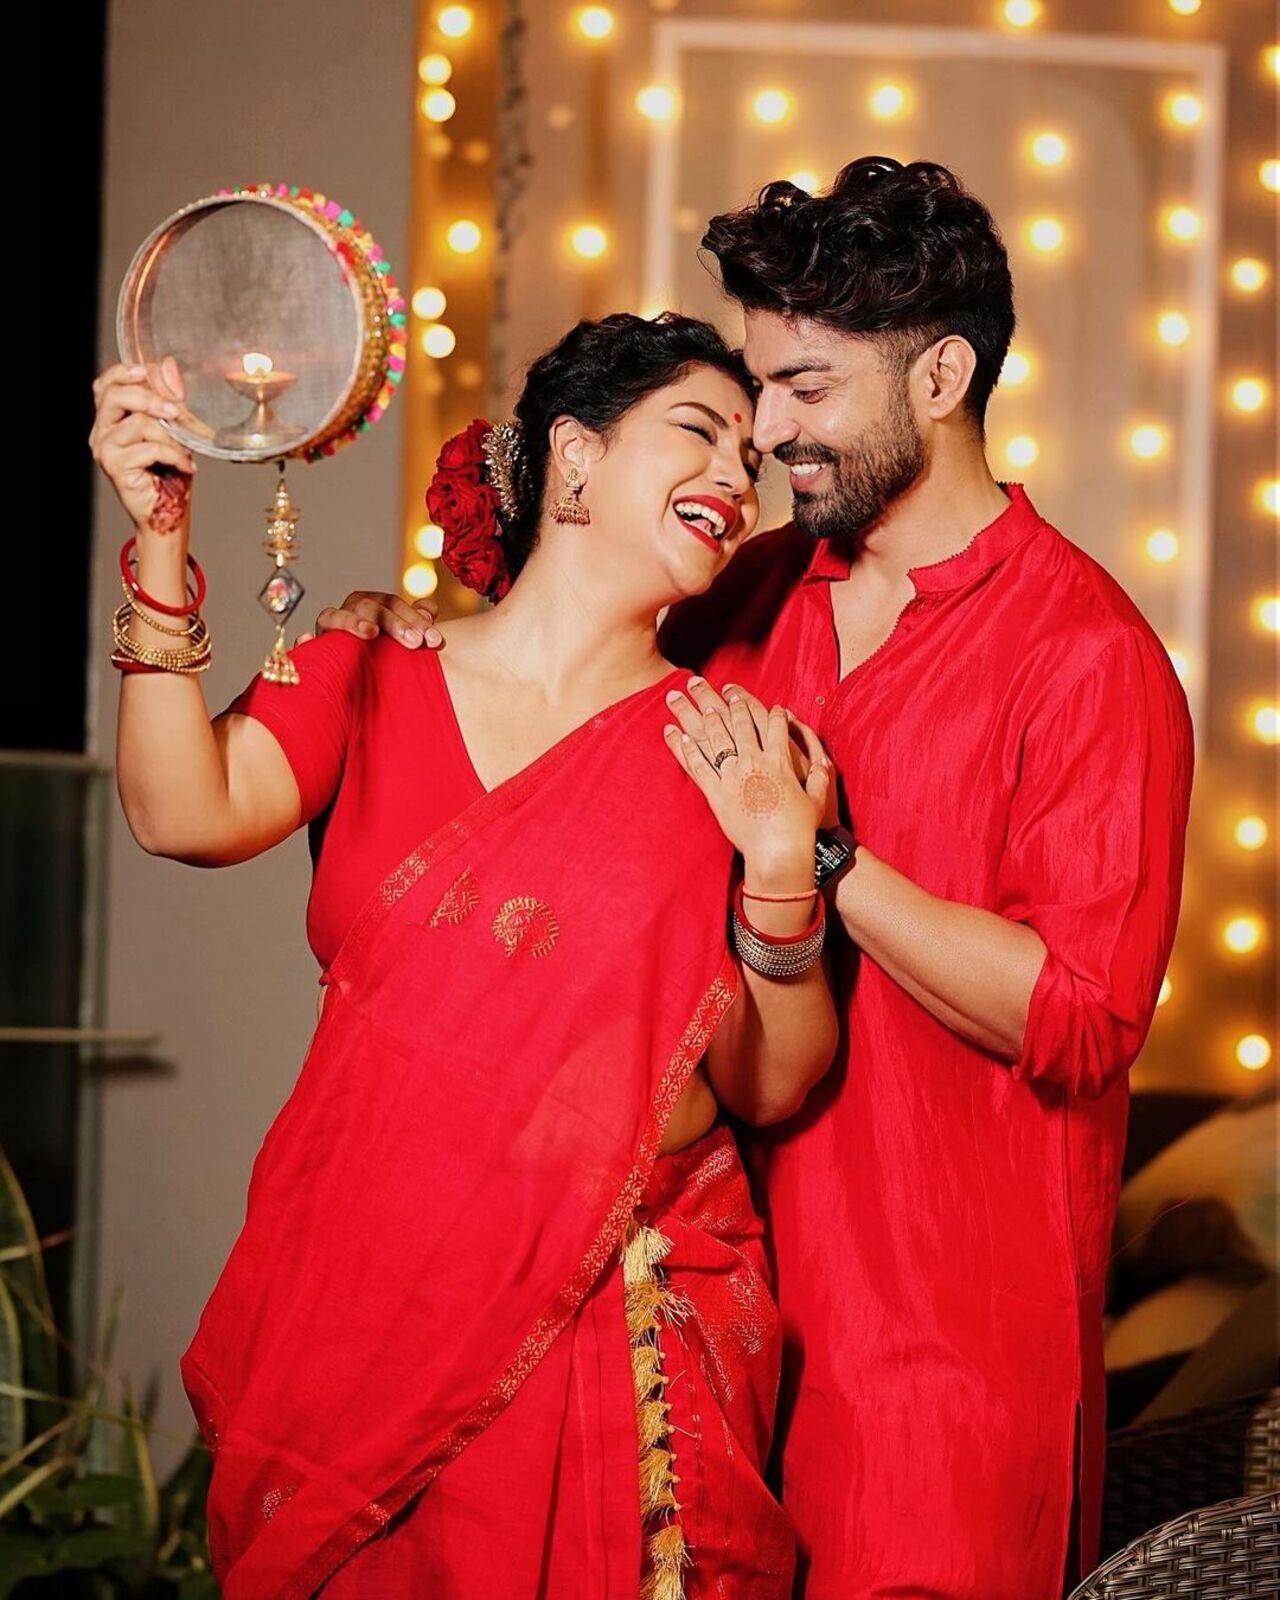 Gurmeet and Debina often share pictures and videos featuring their toddlers